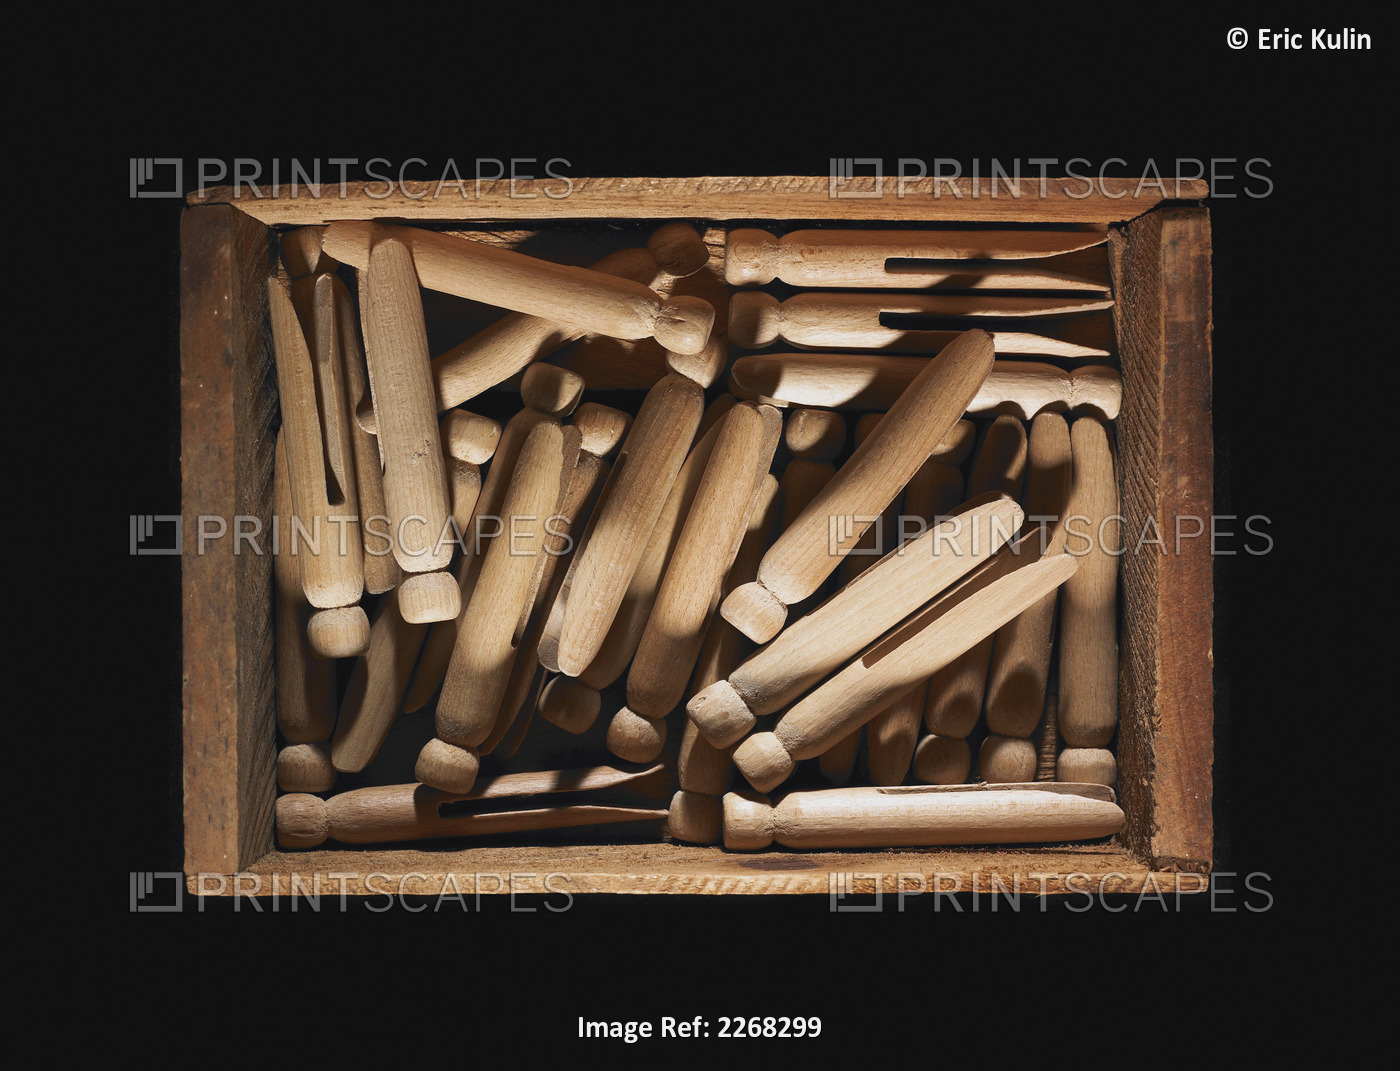 Clothes pins in a wooden crate